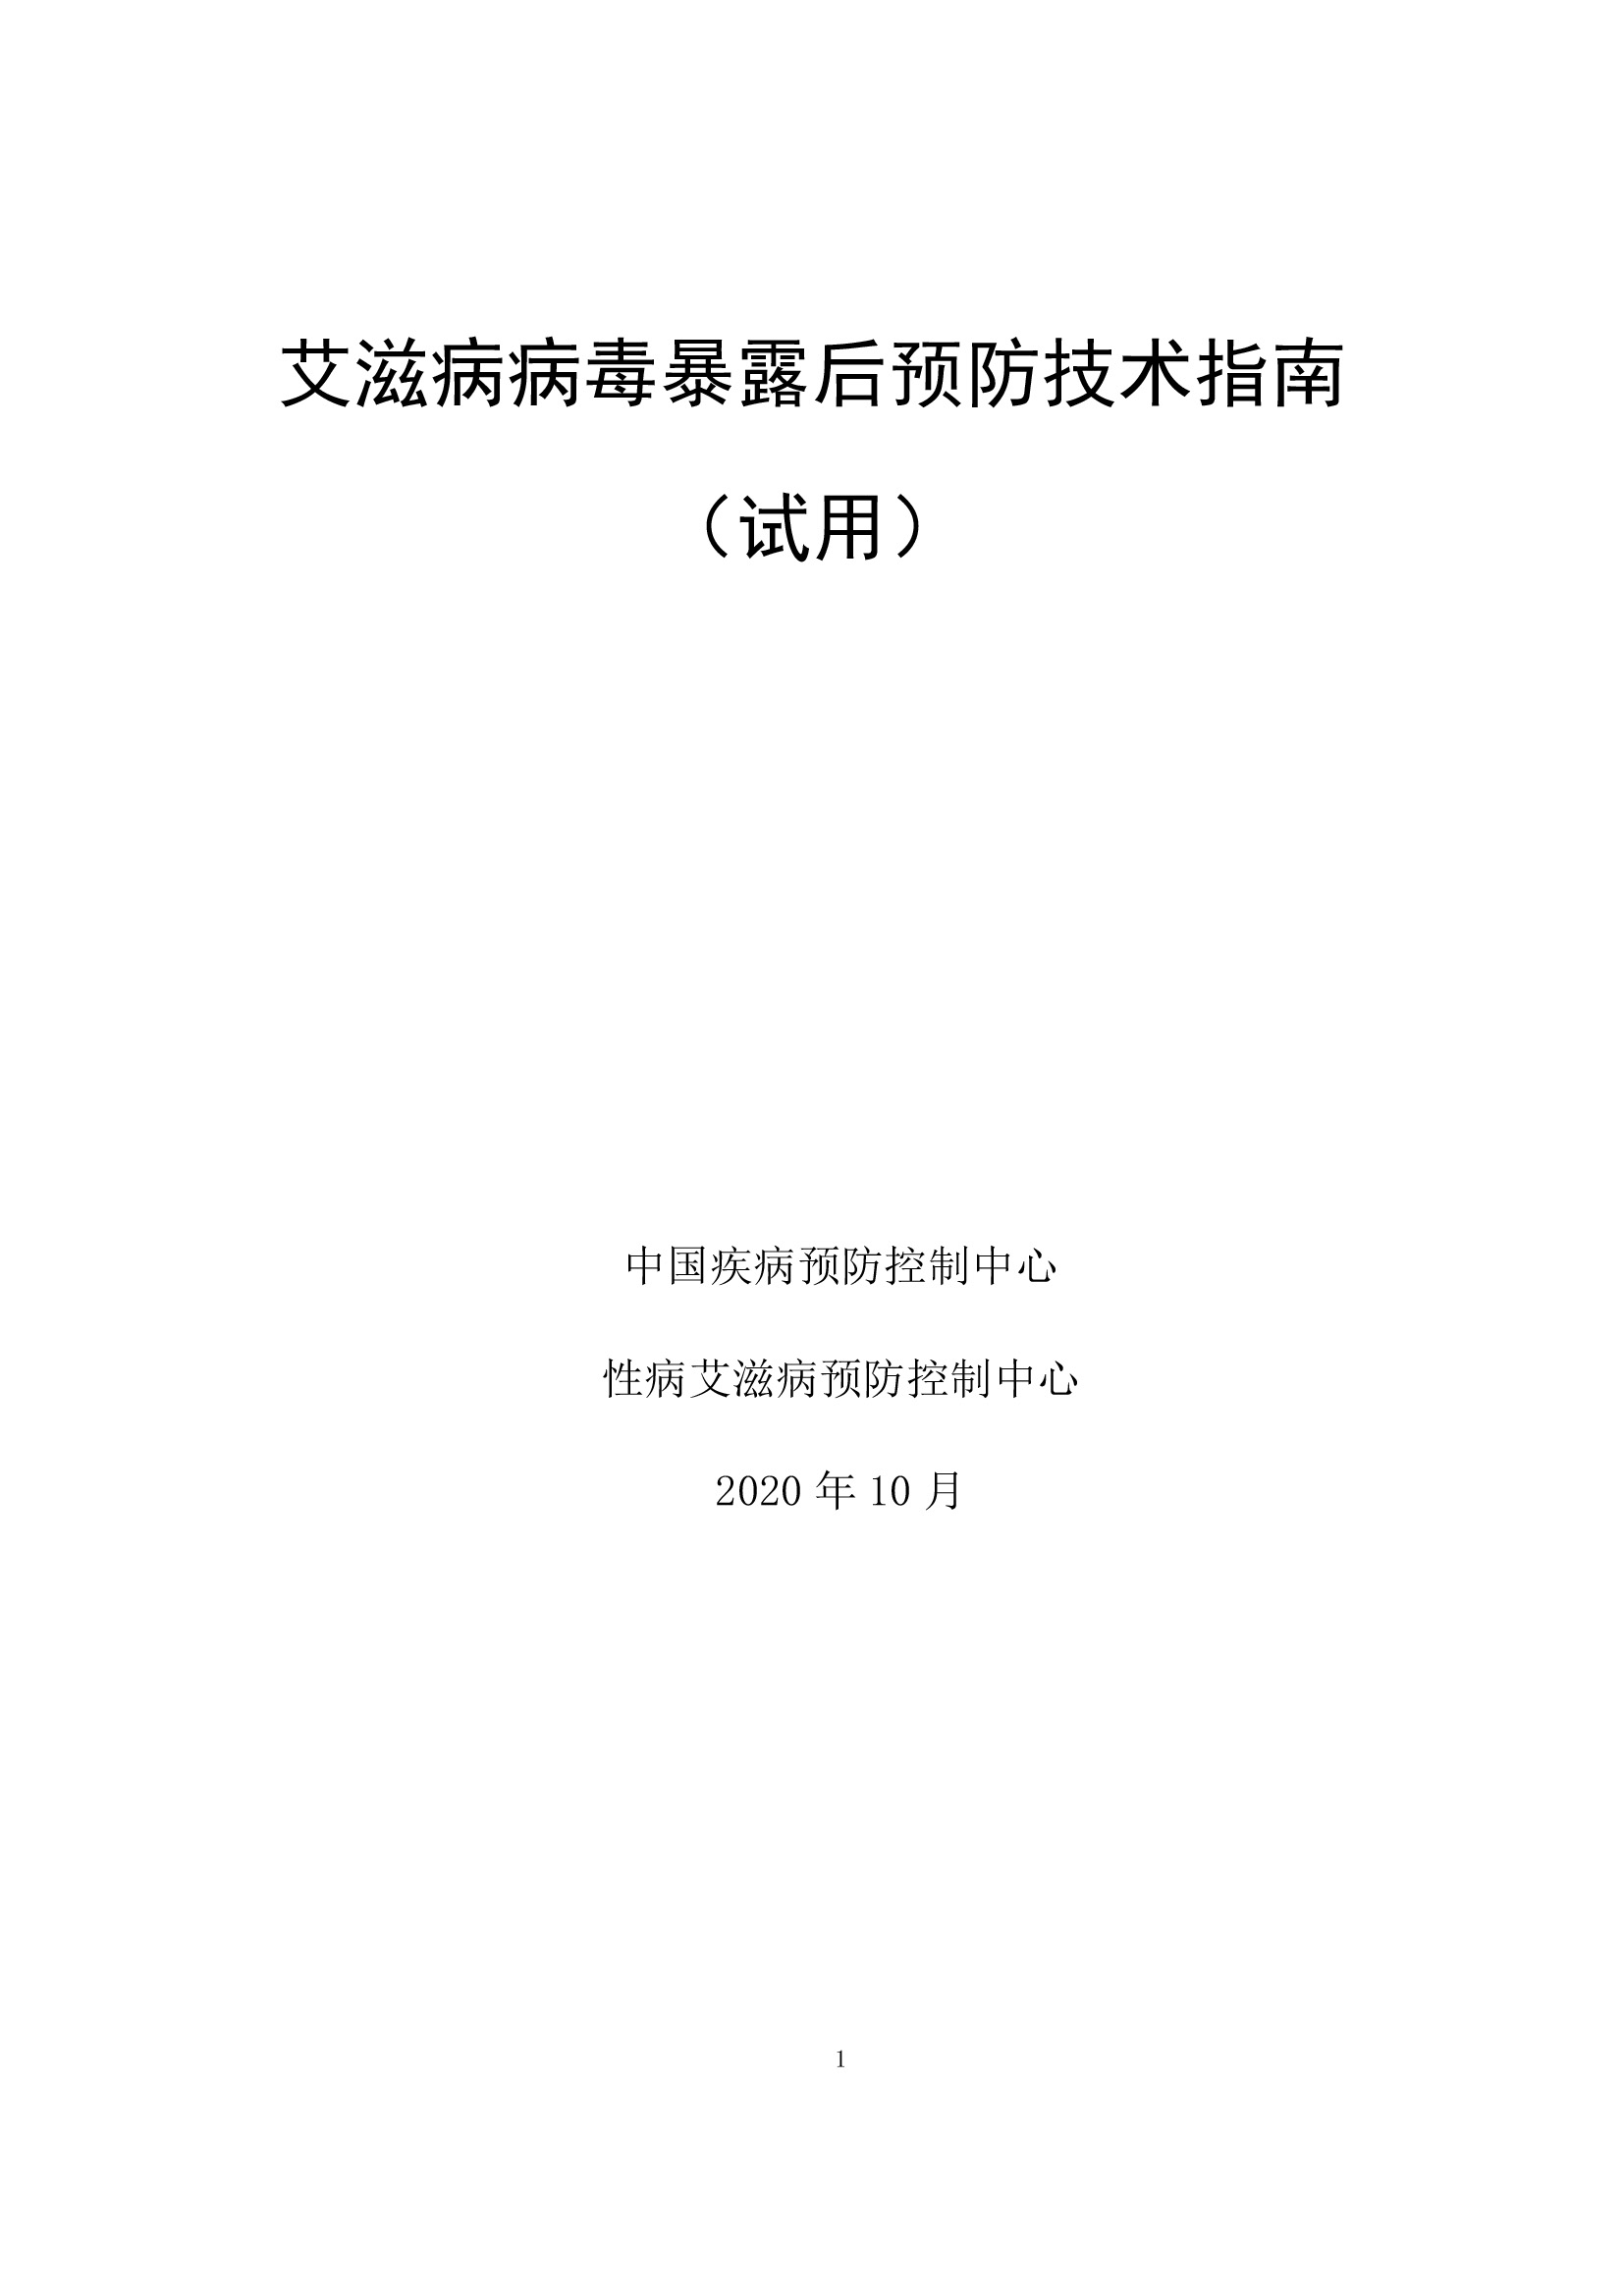 Technical guidelines for HIV post-exposure prophylaxis (China) 